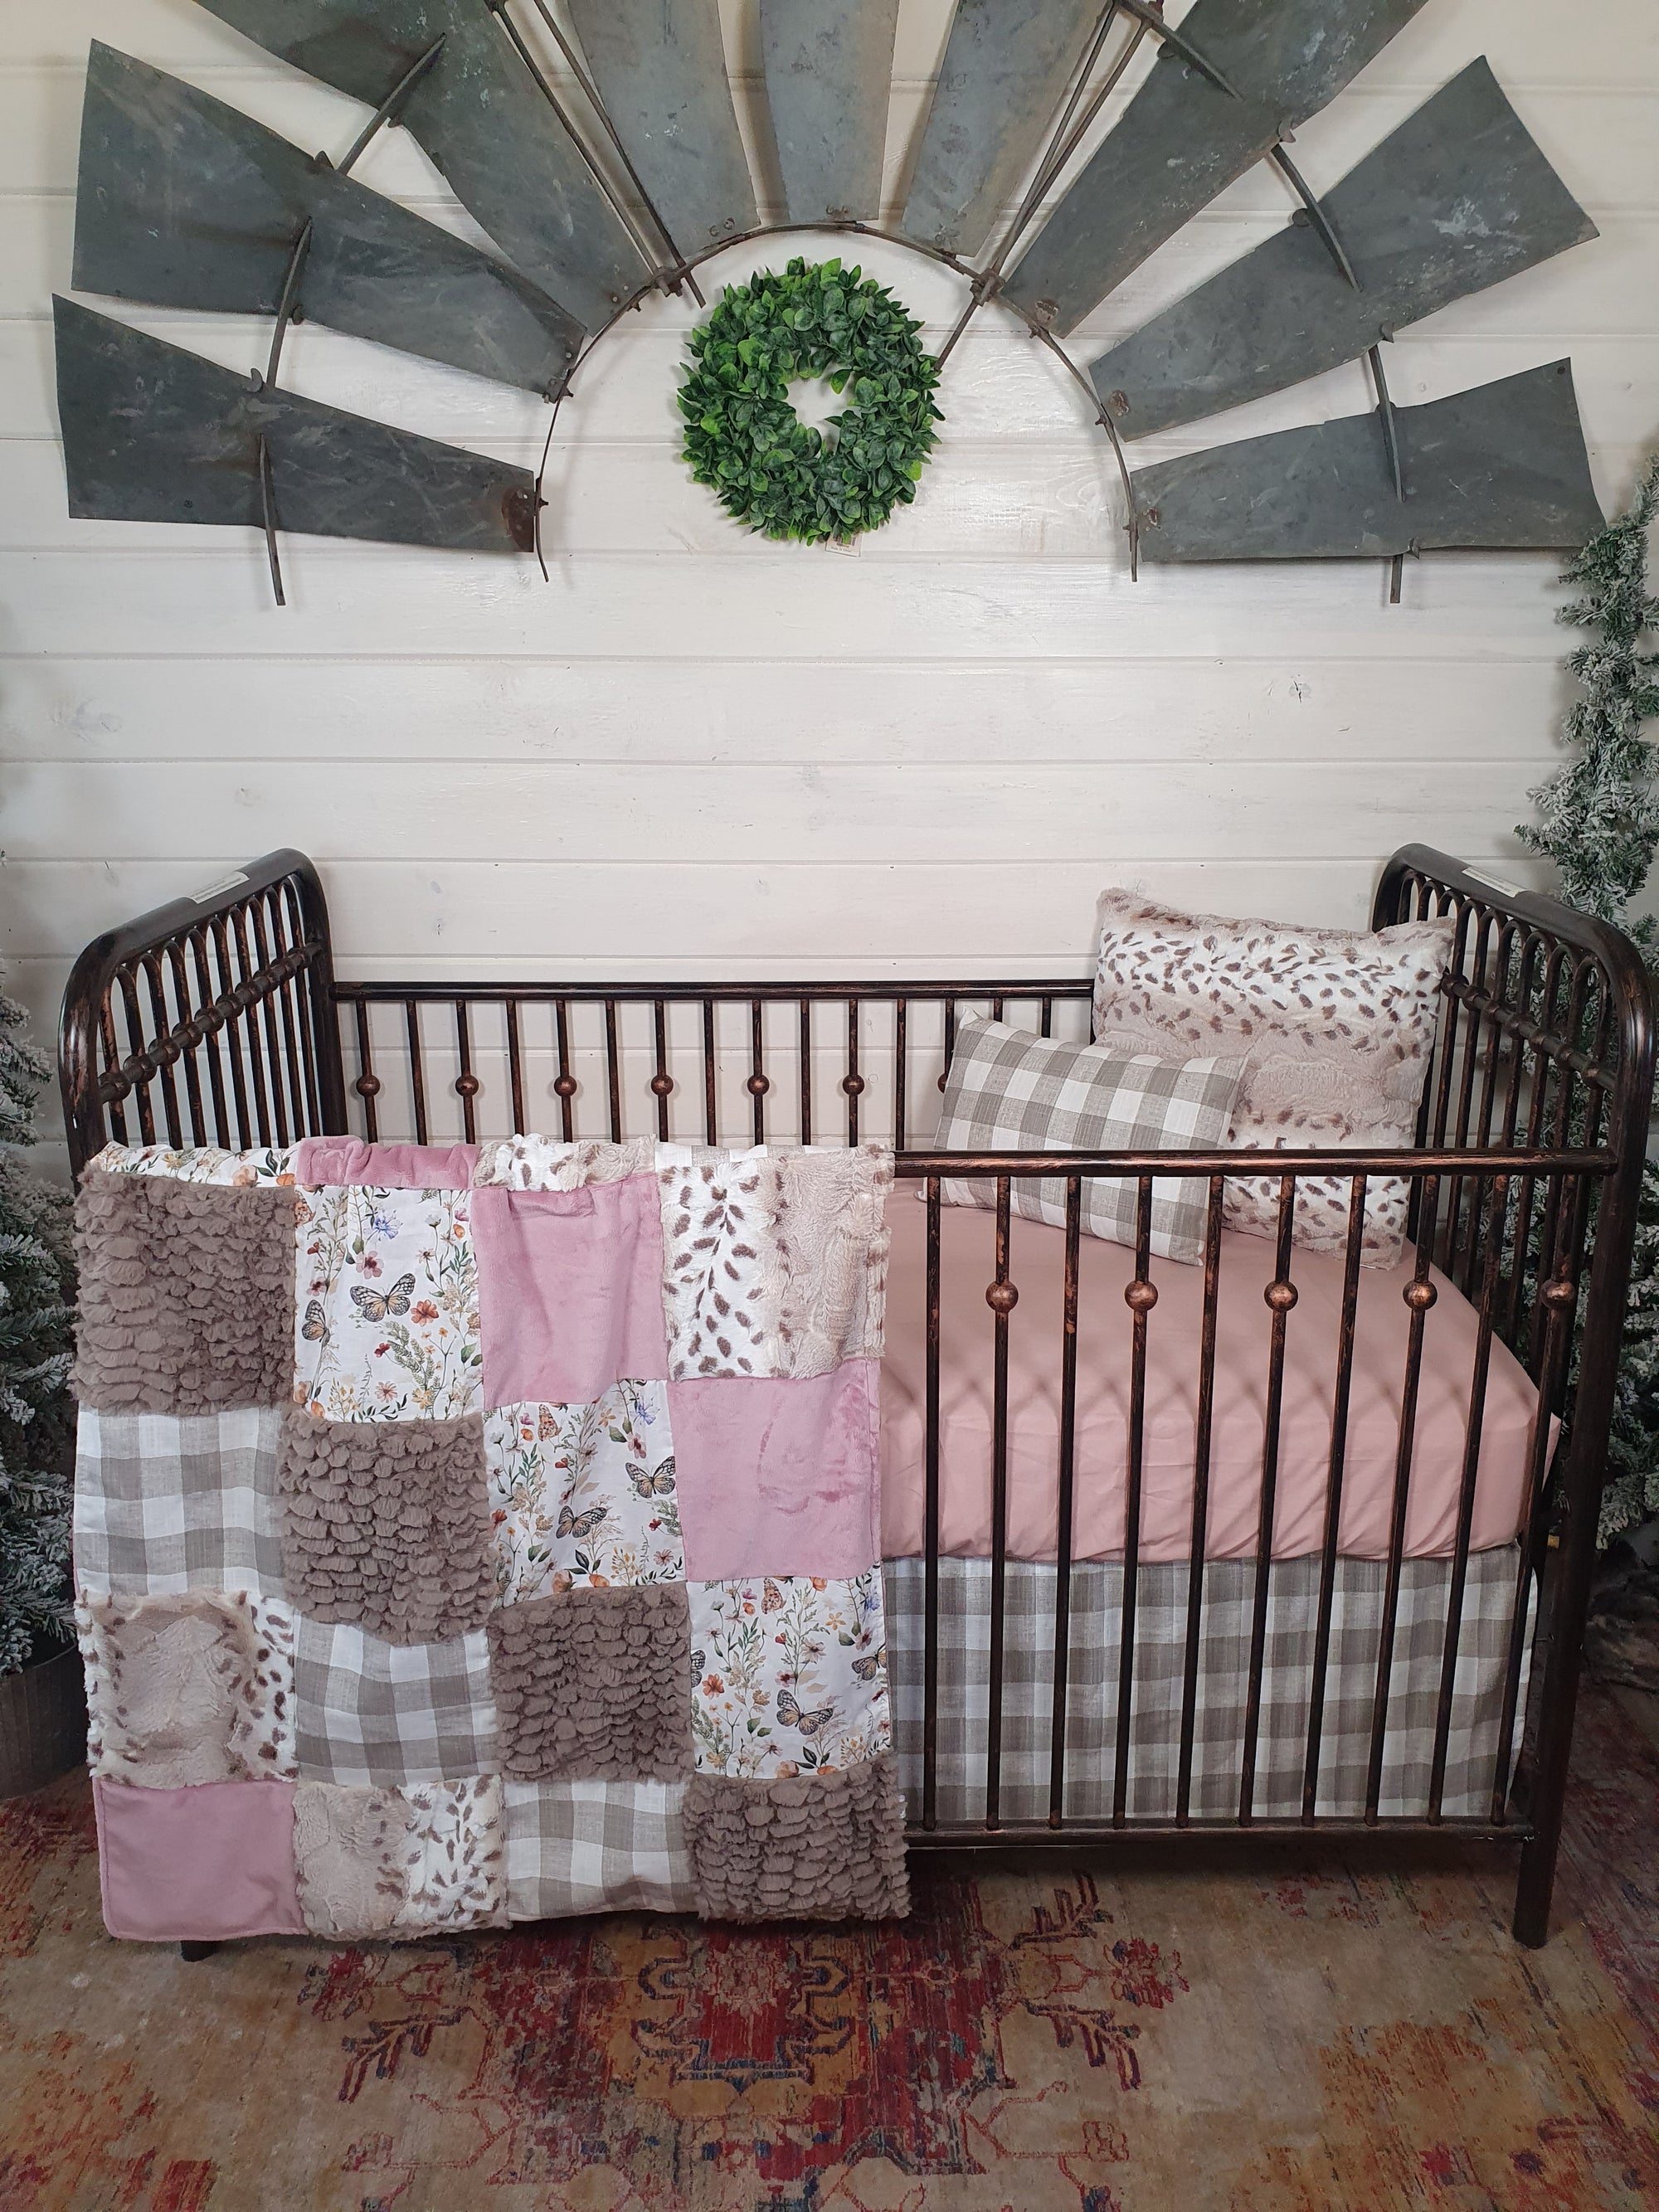 New Release Girl Crib Bedding- Meadow Flower Butterfly Baby Bedding Collection - DBC Baby Bedding Co 